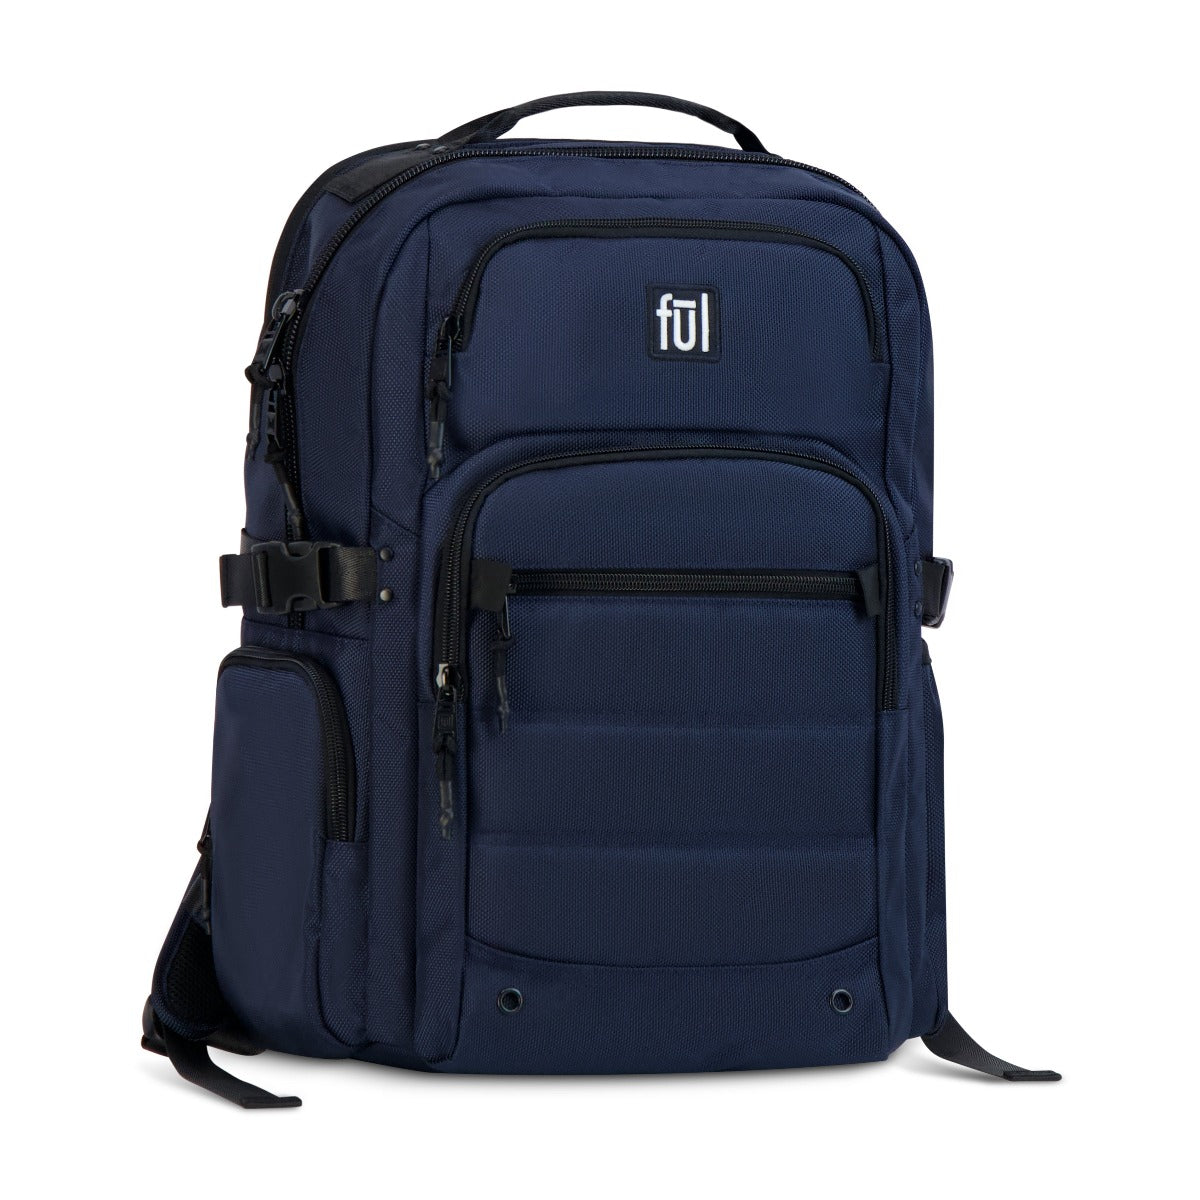 ful tactics collection division backpack navy blue - spacious tech backpack